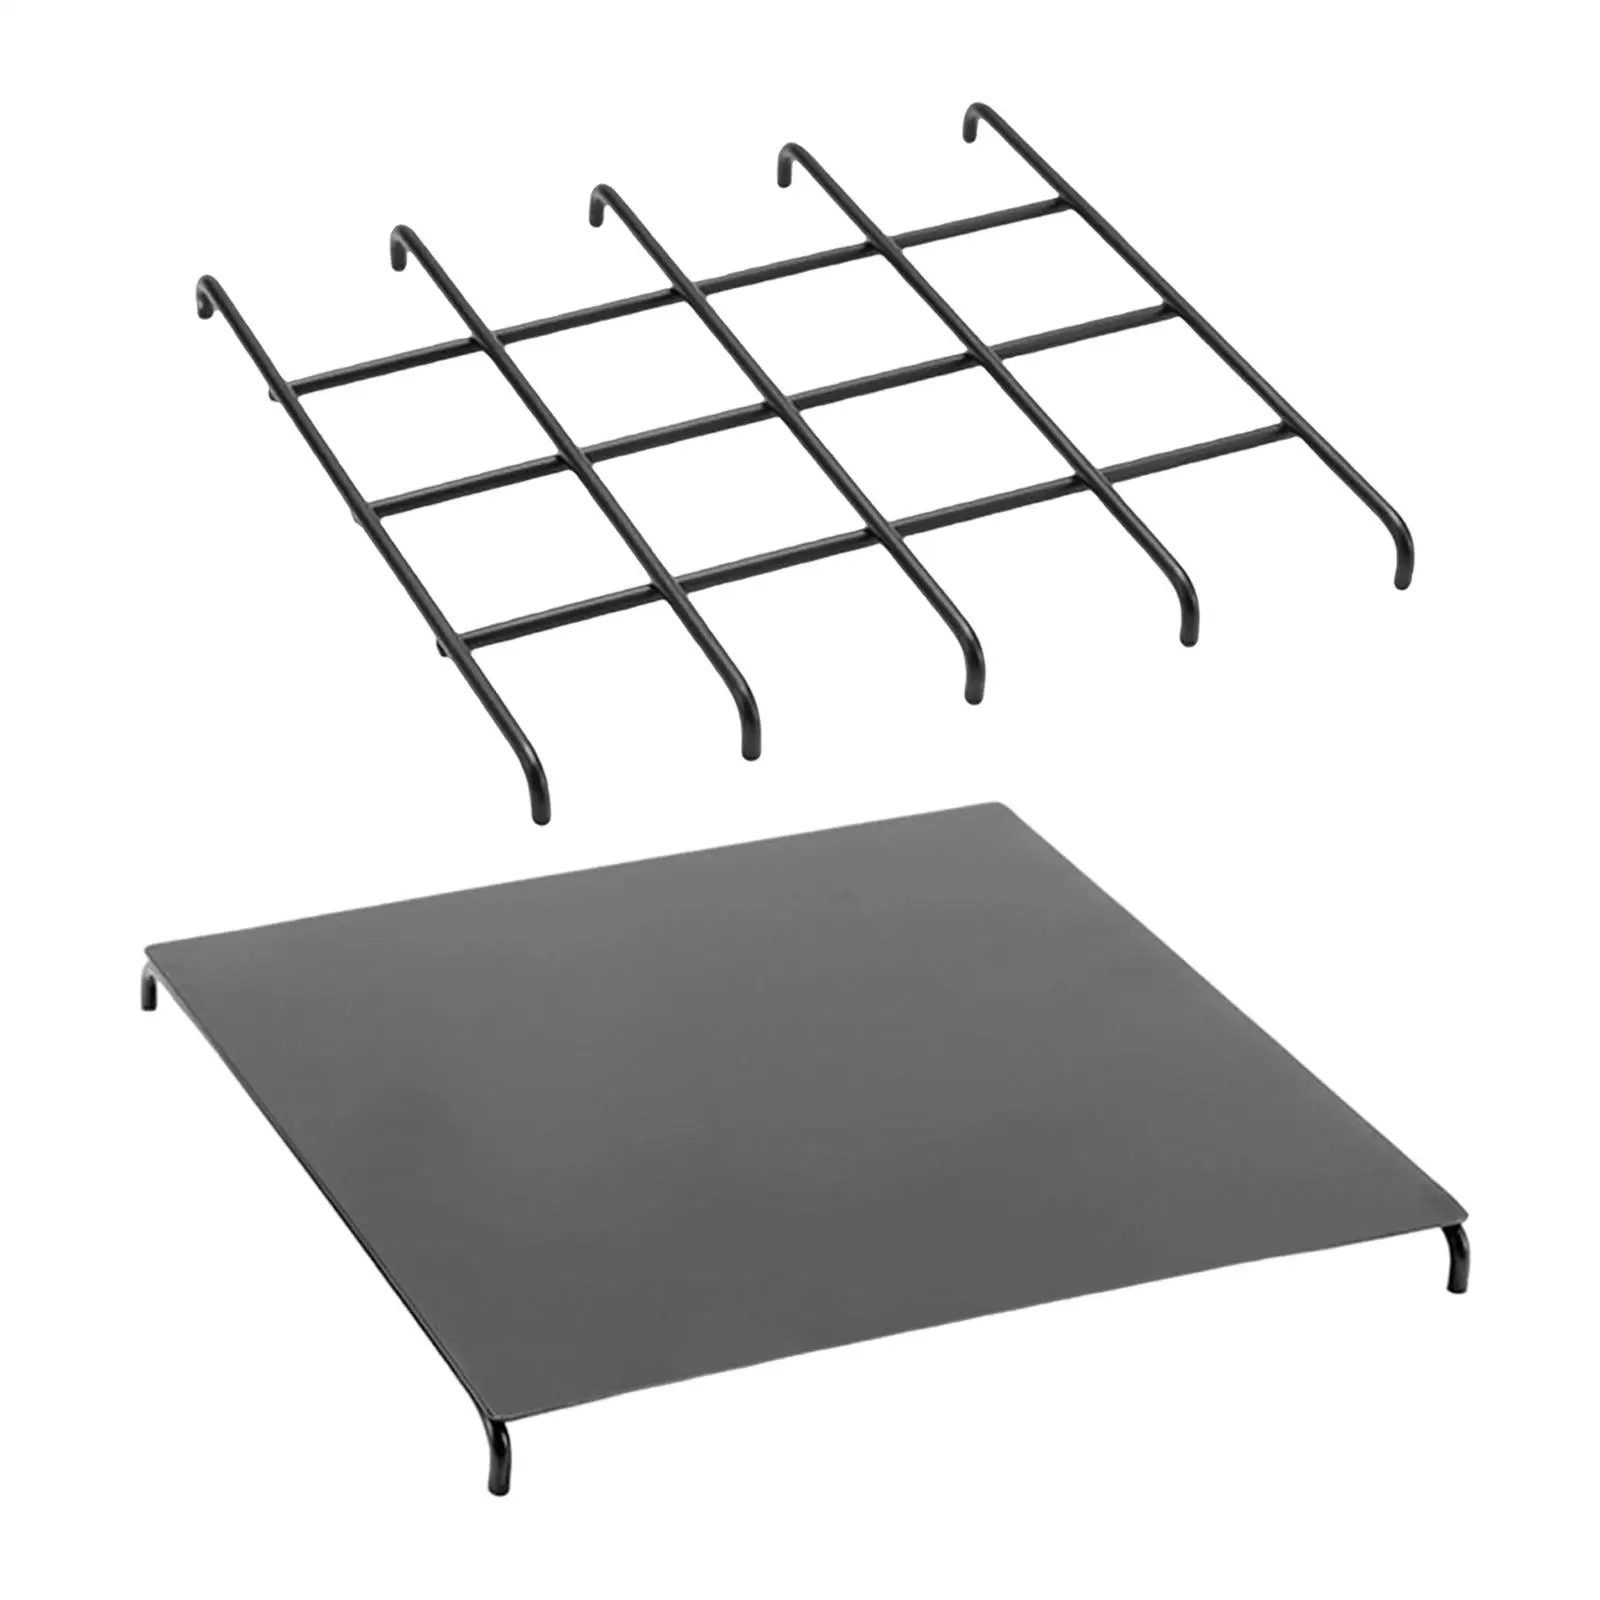 Camping table top, folding table, heat insulation, steel, 7.68